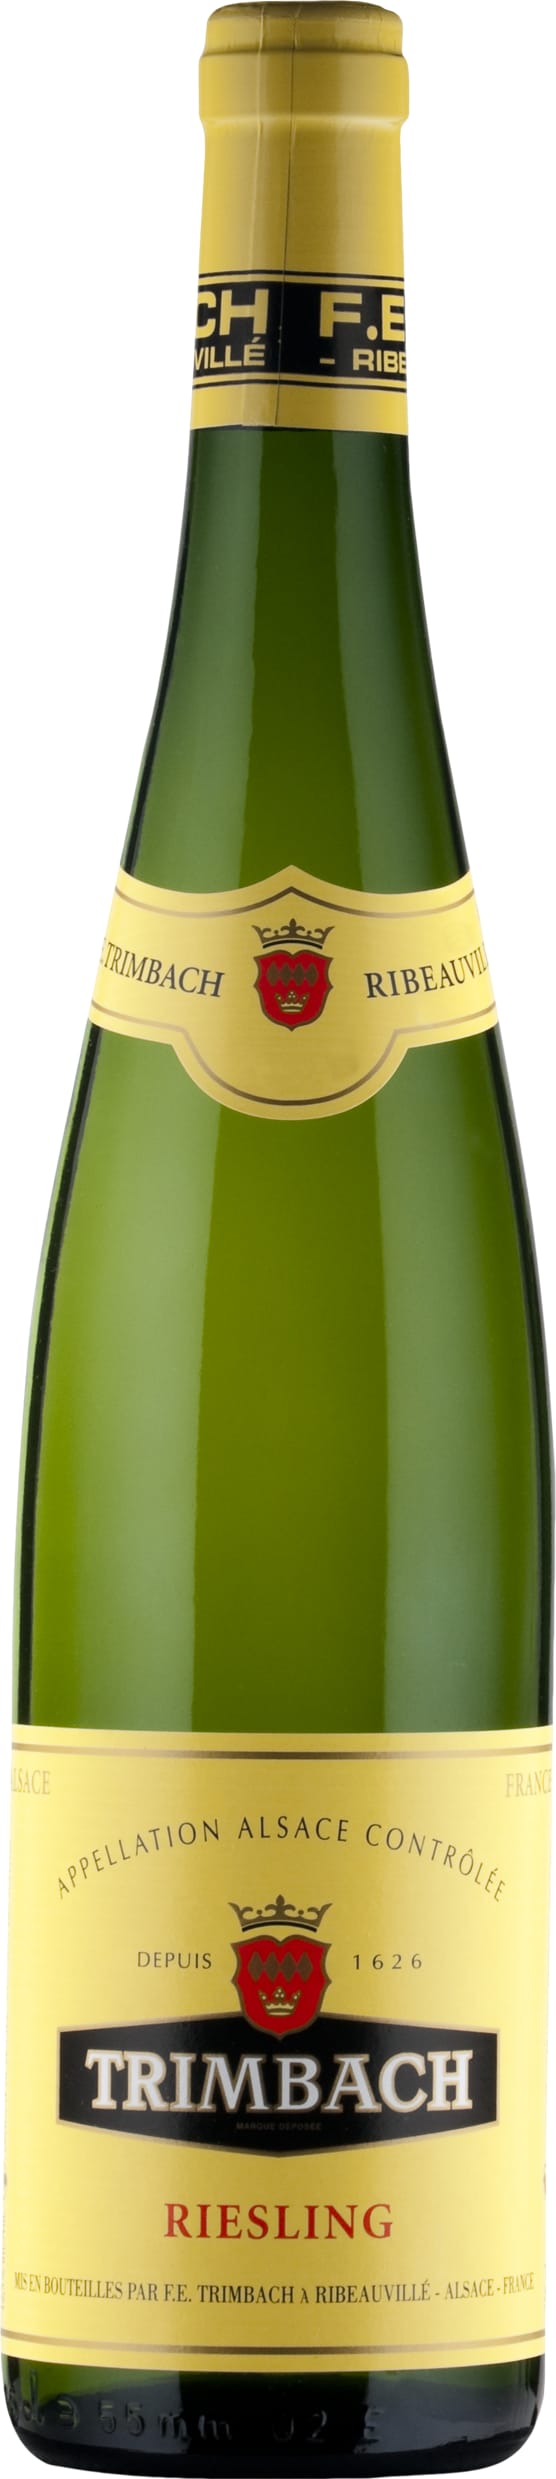 Trimbach Riesling 2019 6x75cl - Just Wines 